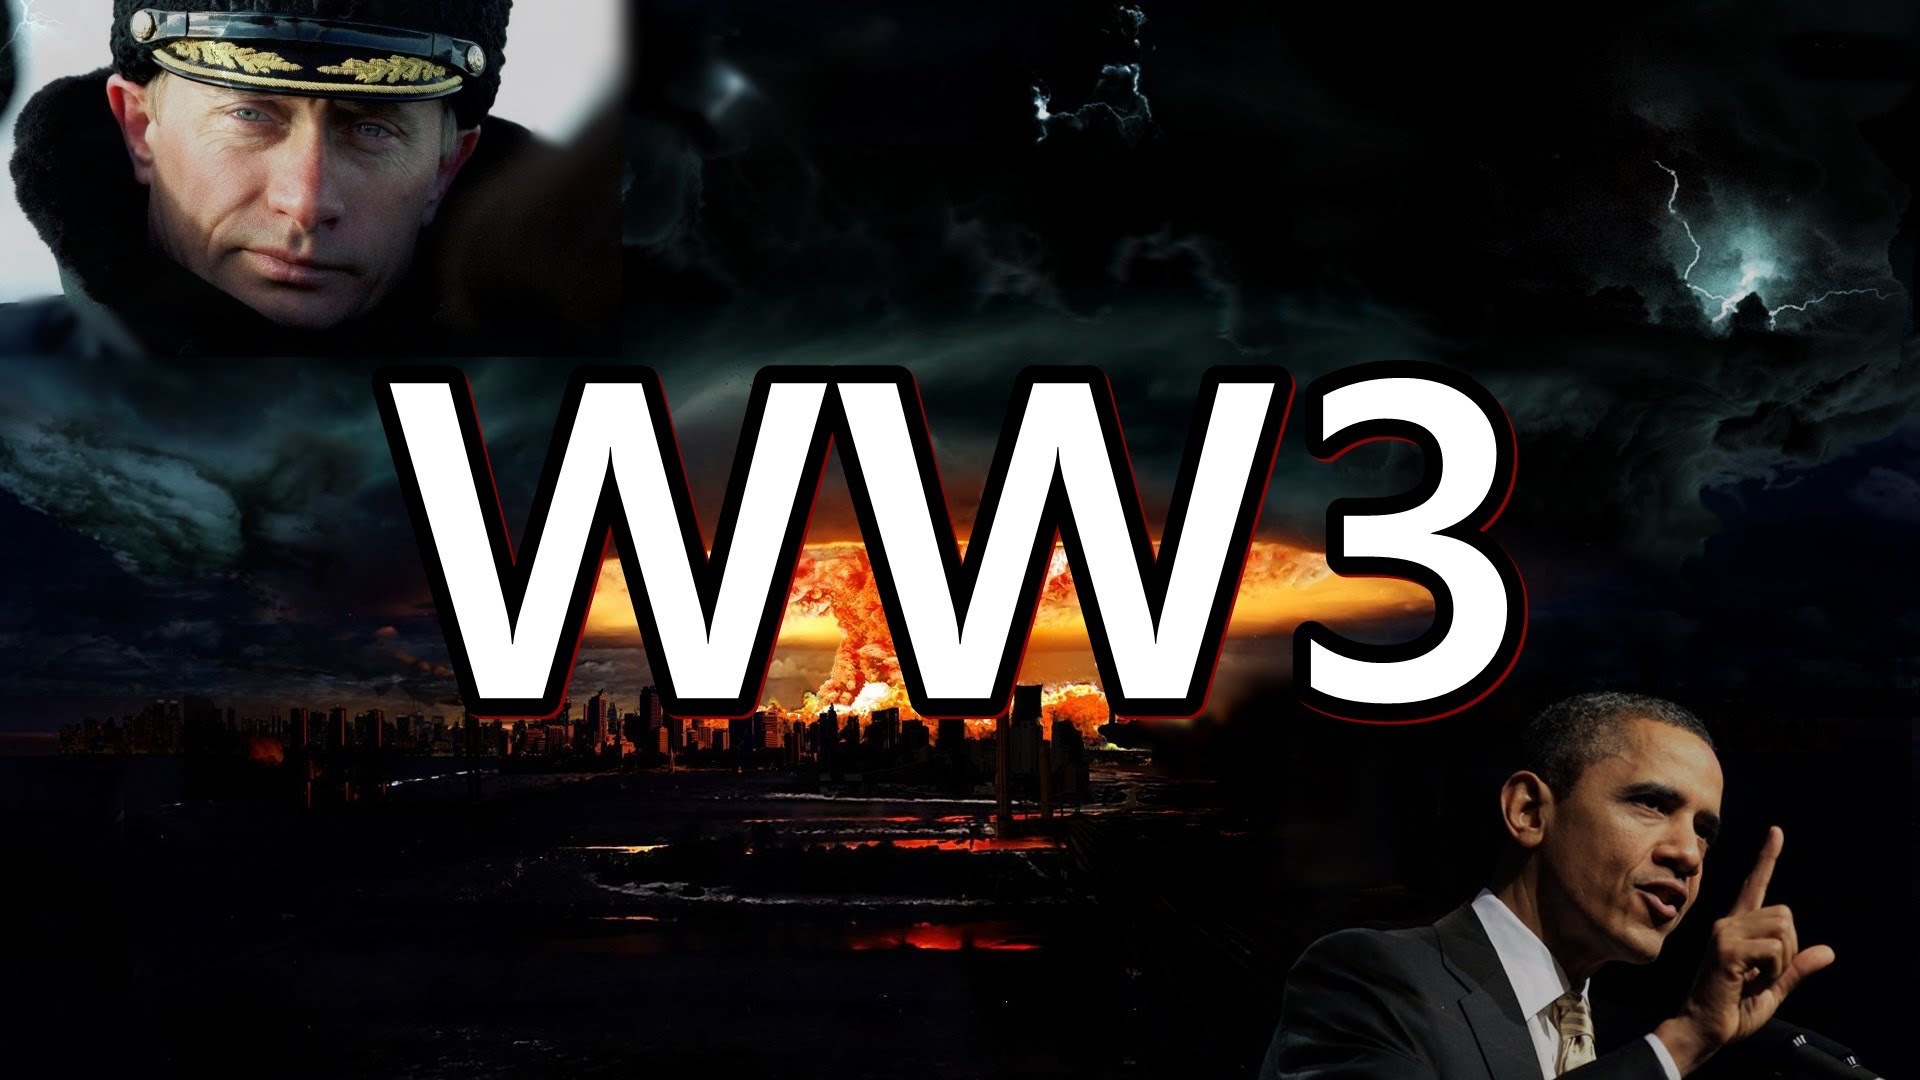 MUST SEE! World War 3 is upon us!